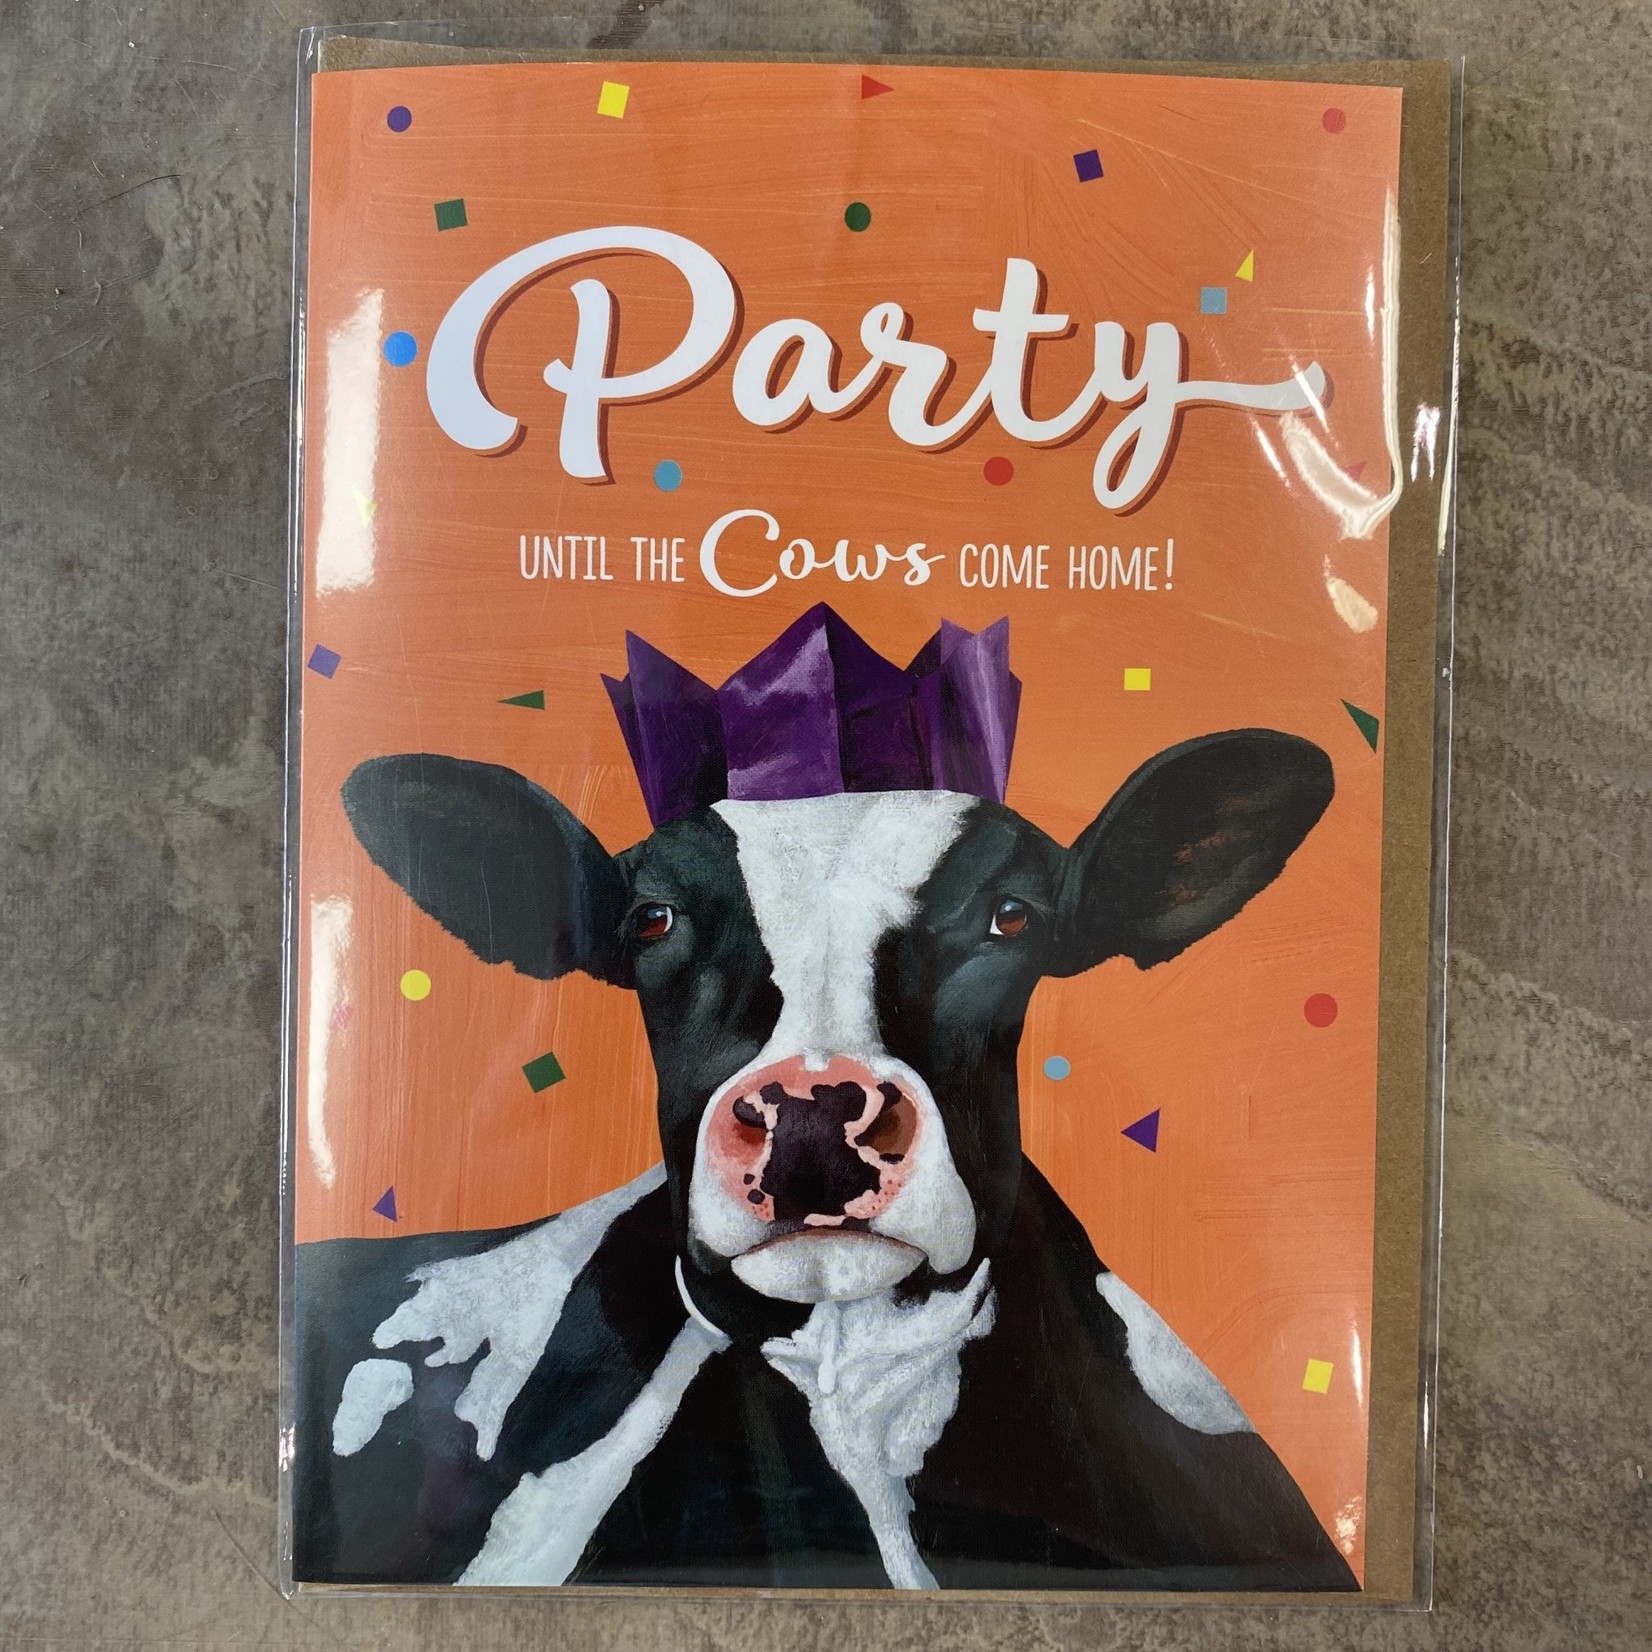 23rd Day Greeting Cards - Party Cow